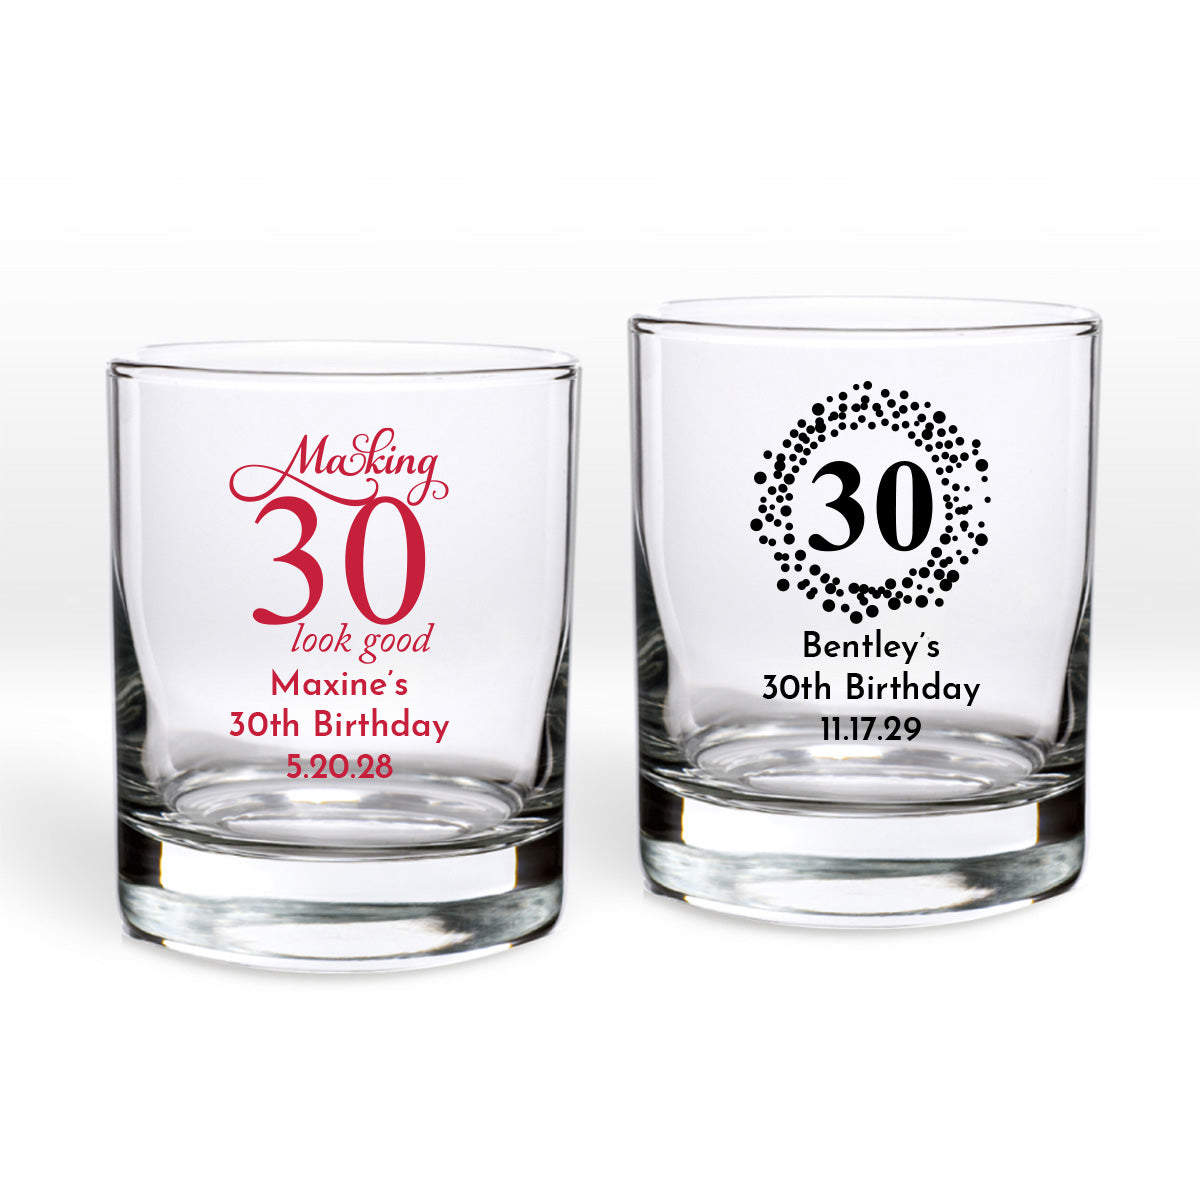 Making 30 Look Good Personalized Shot Glass or Votive Holder (Set of 24)